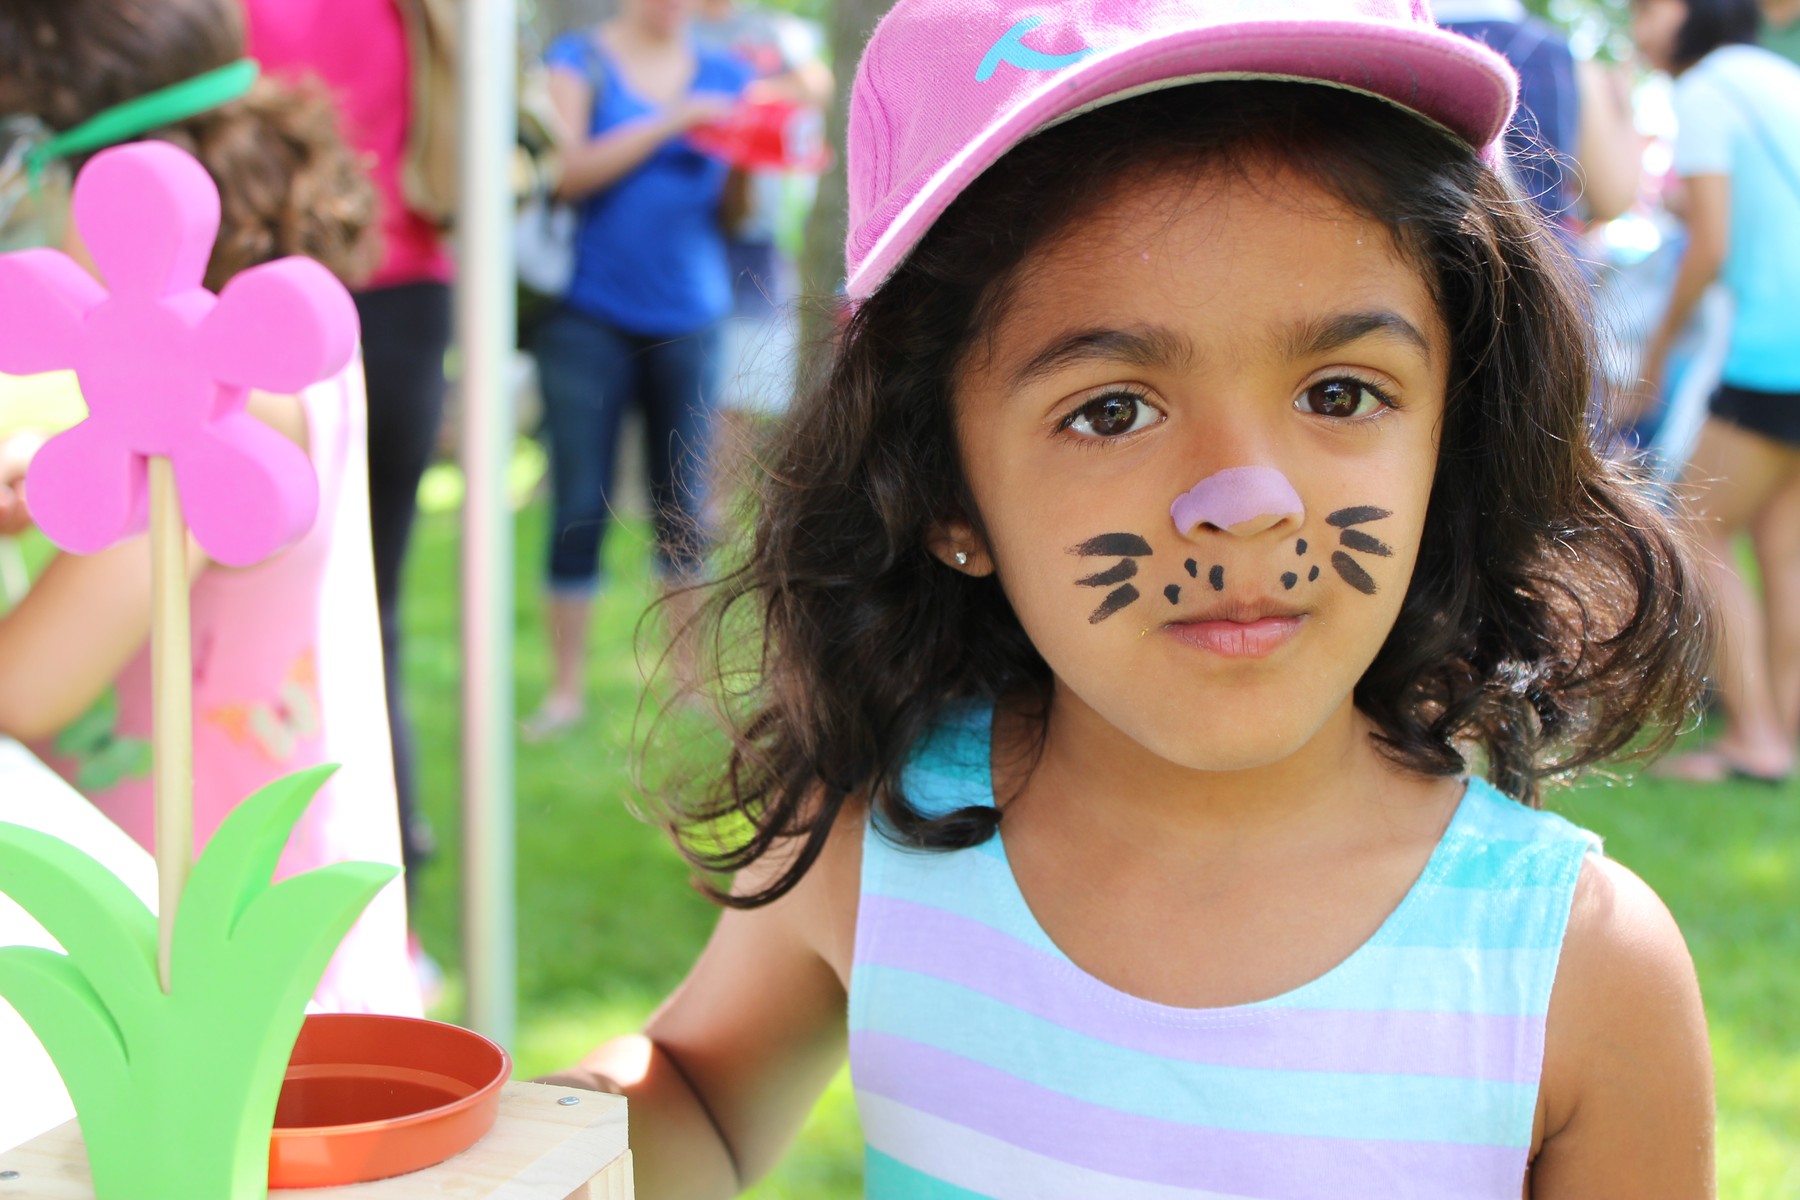 Child with face painted to look like a cat | Town of Oakville